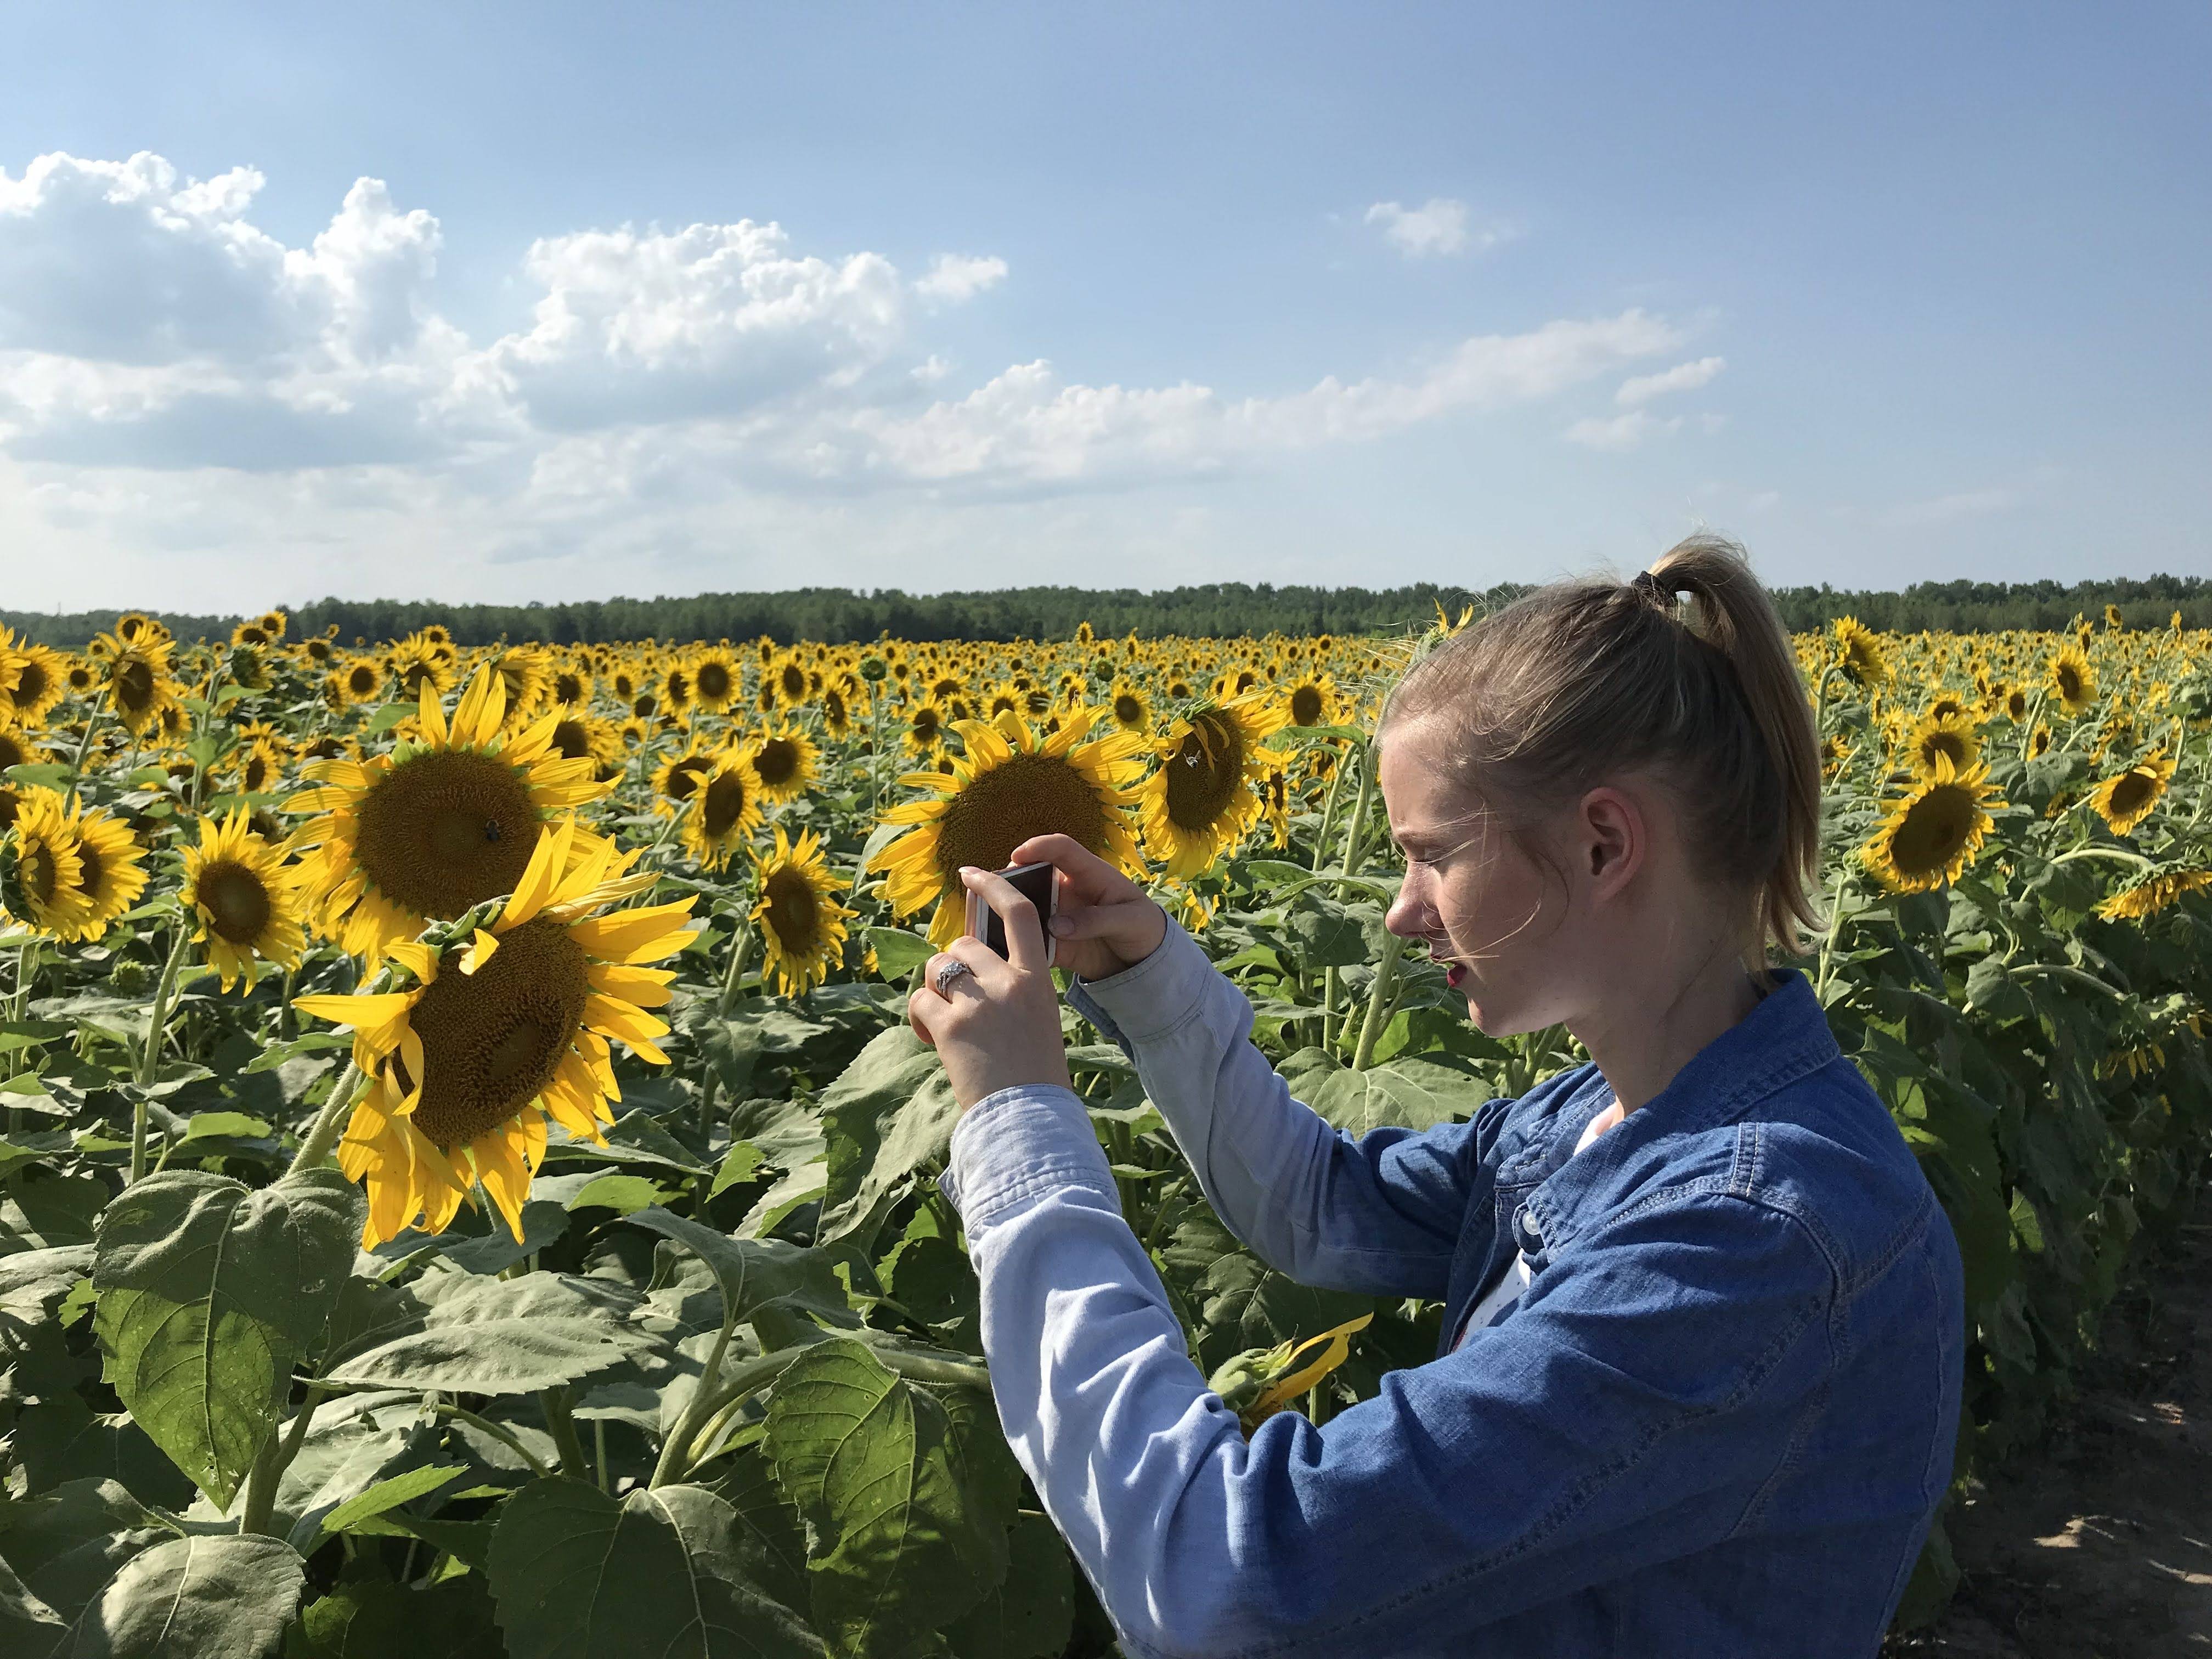 Masha taking photo in a field of sunflowers with iPhone